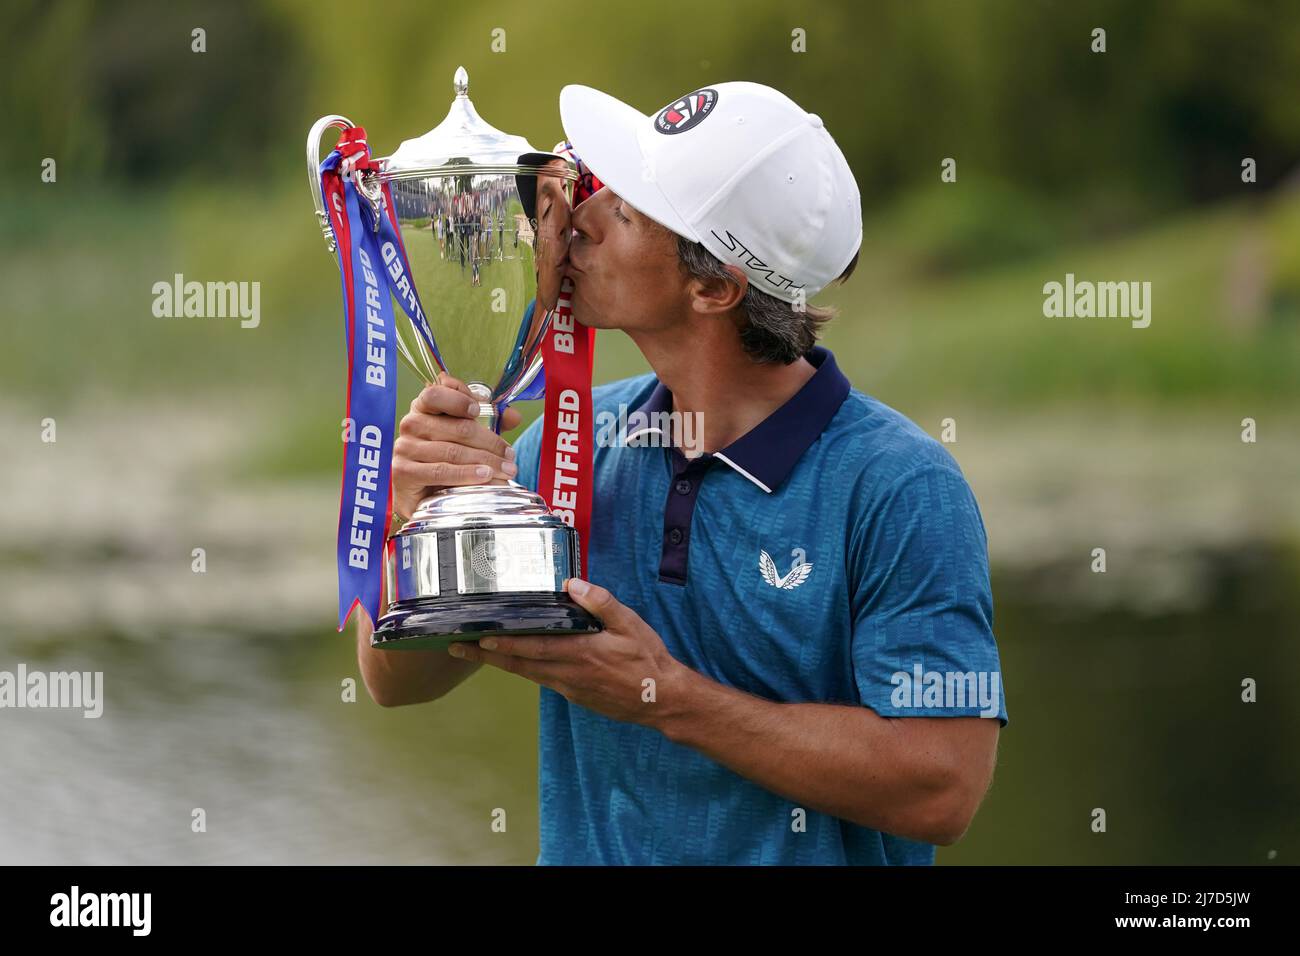 Denmark's Thorbjorn Olesen celebrates winning with the trophy after day four of Betfred British Masters at The Belfry, Sutton Coldfield. Picture date: Sunday May 8, 2022. Stock Photo